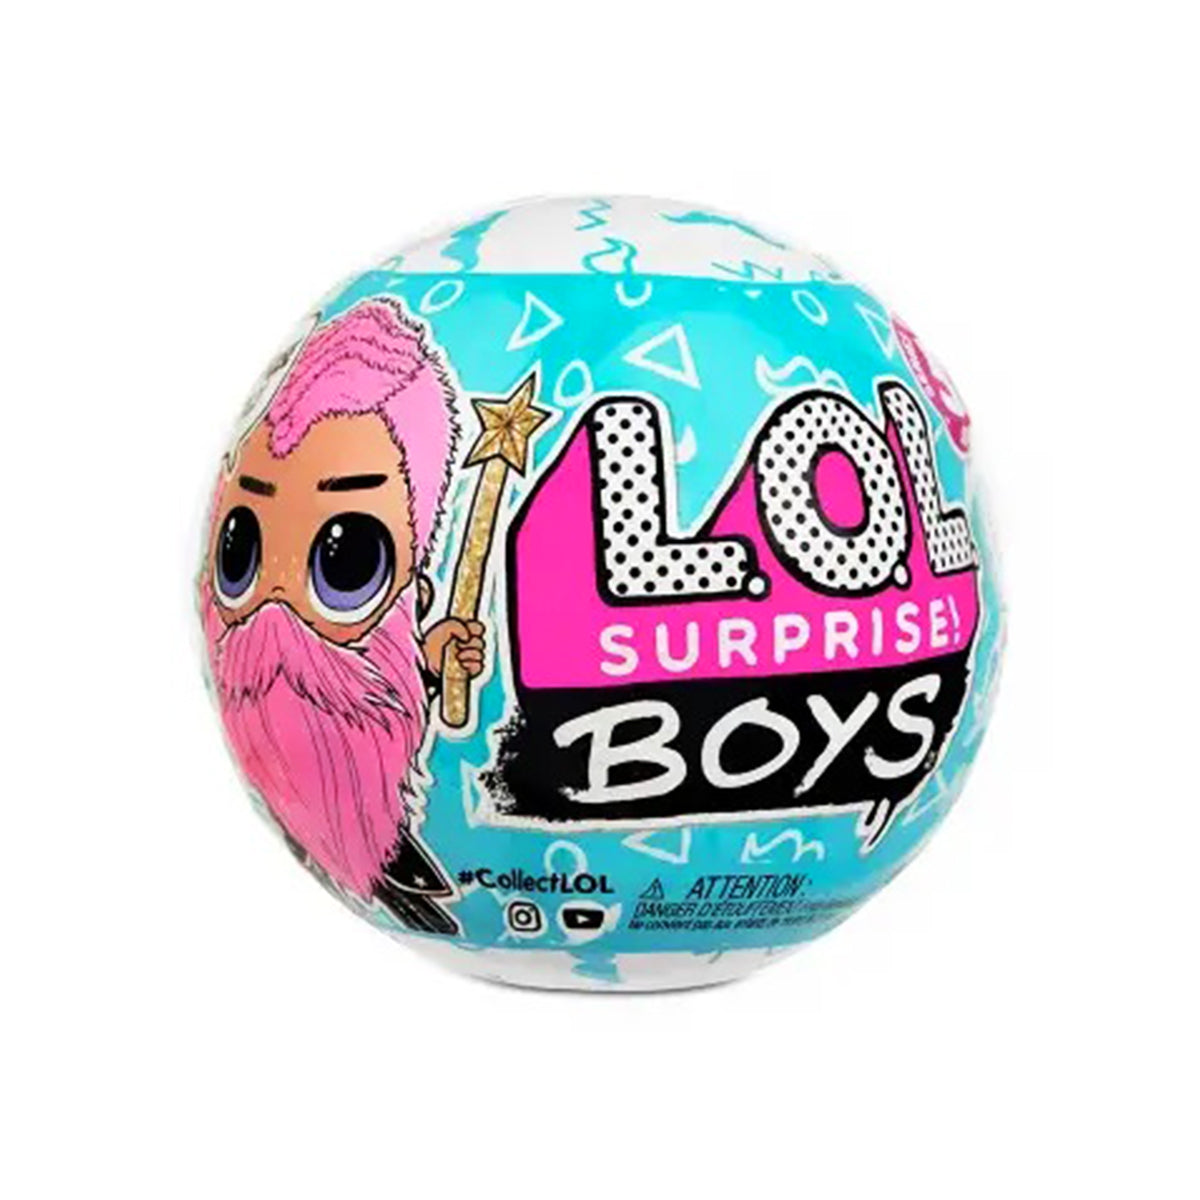 L.O.L. Surprise Boys Doll - (Styles Vary - One Supplied)